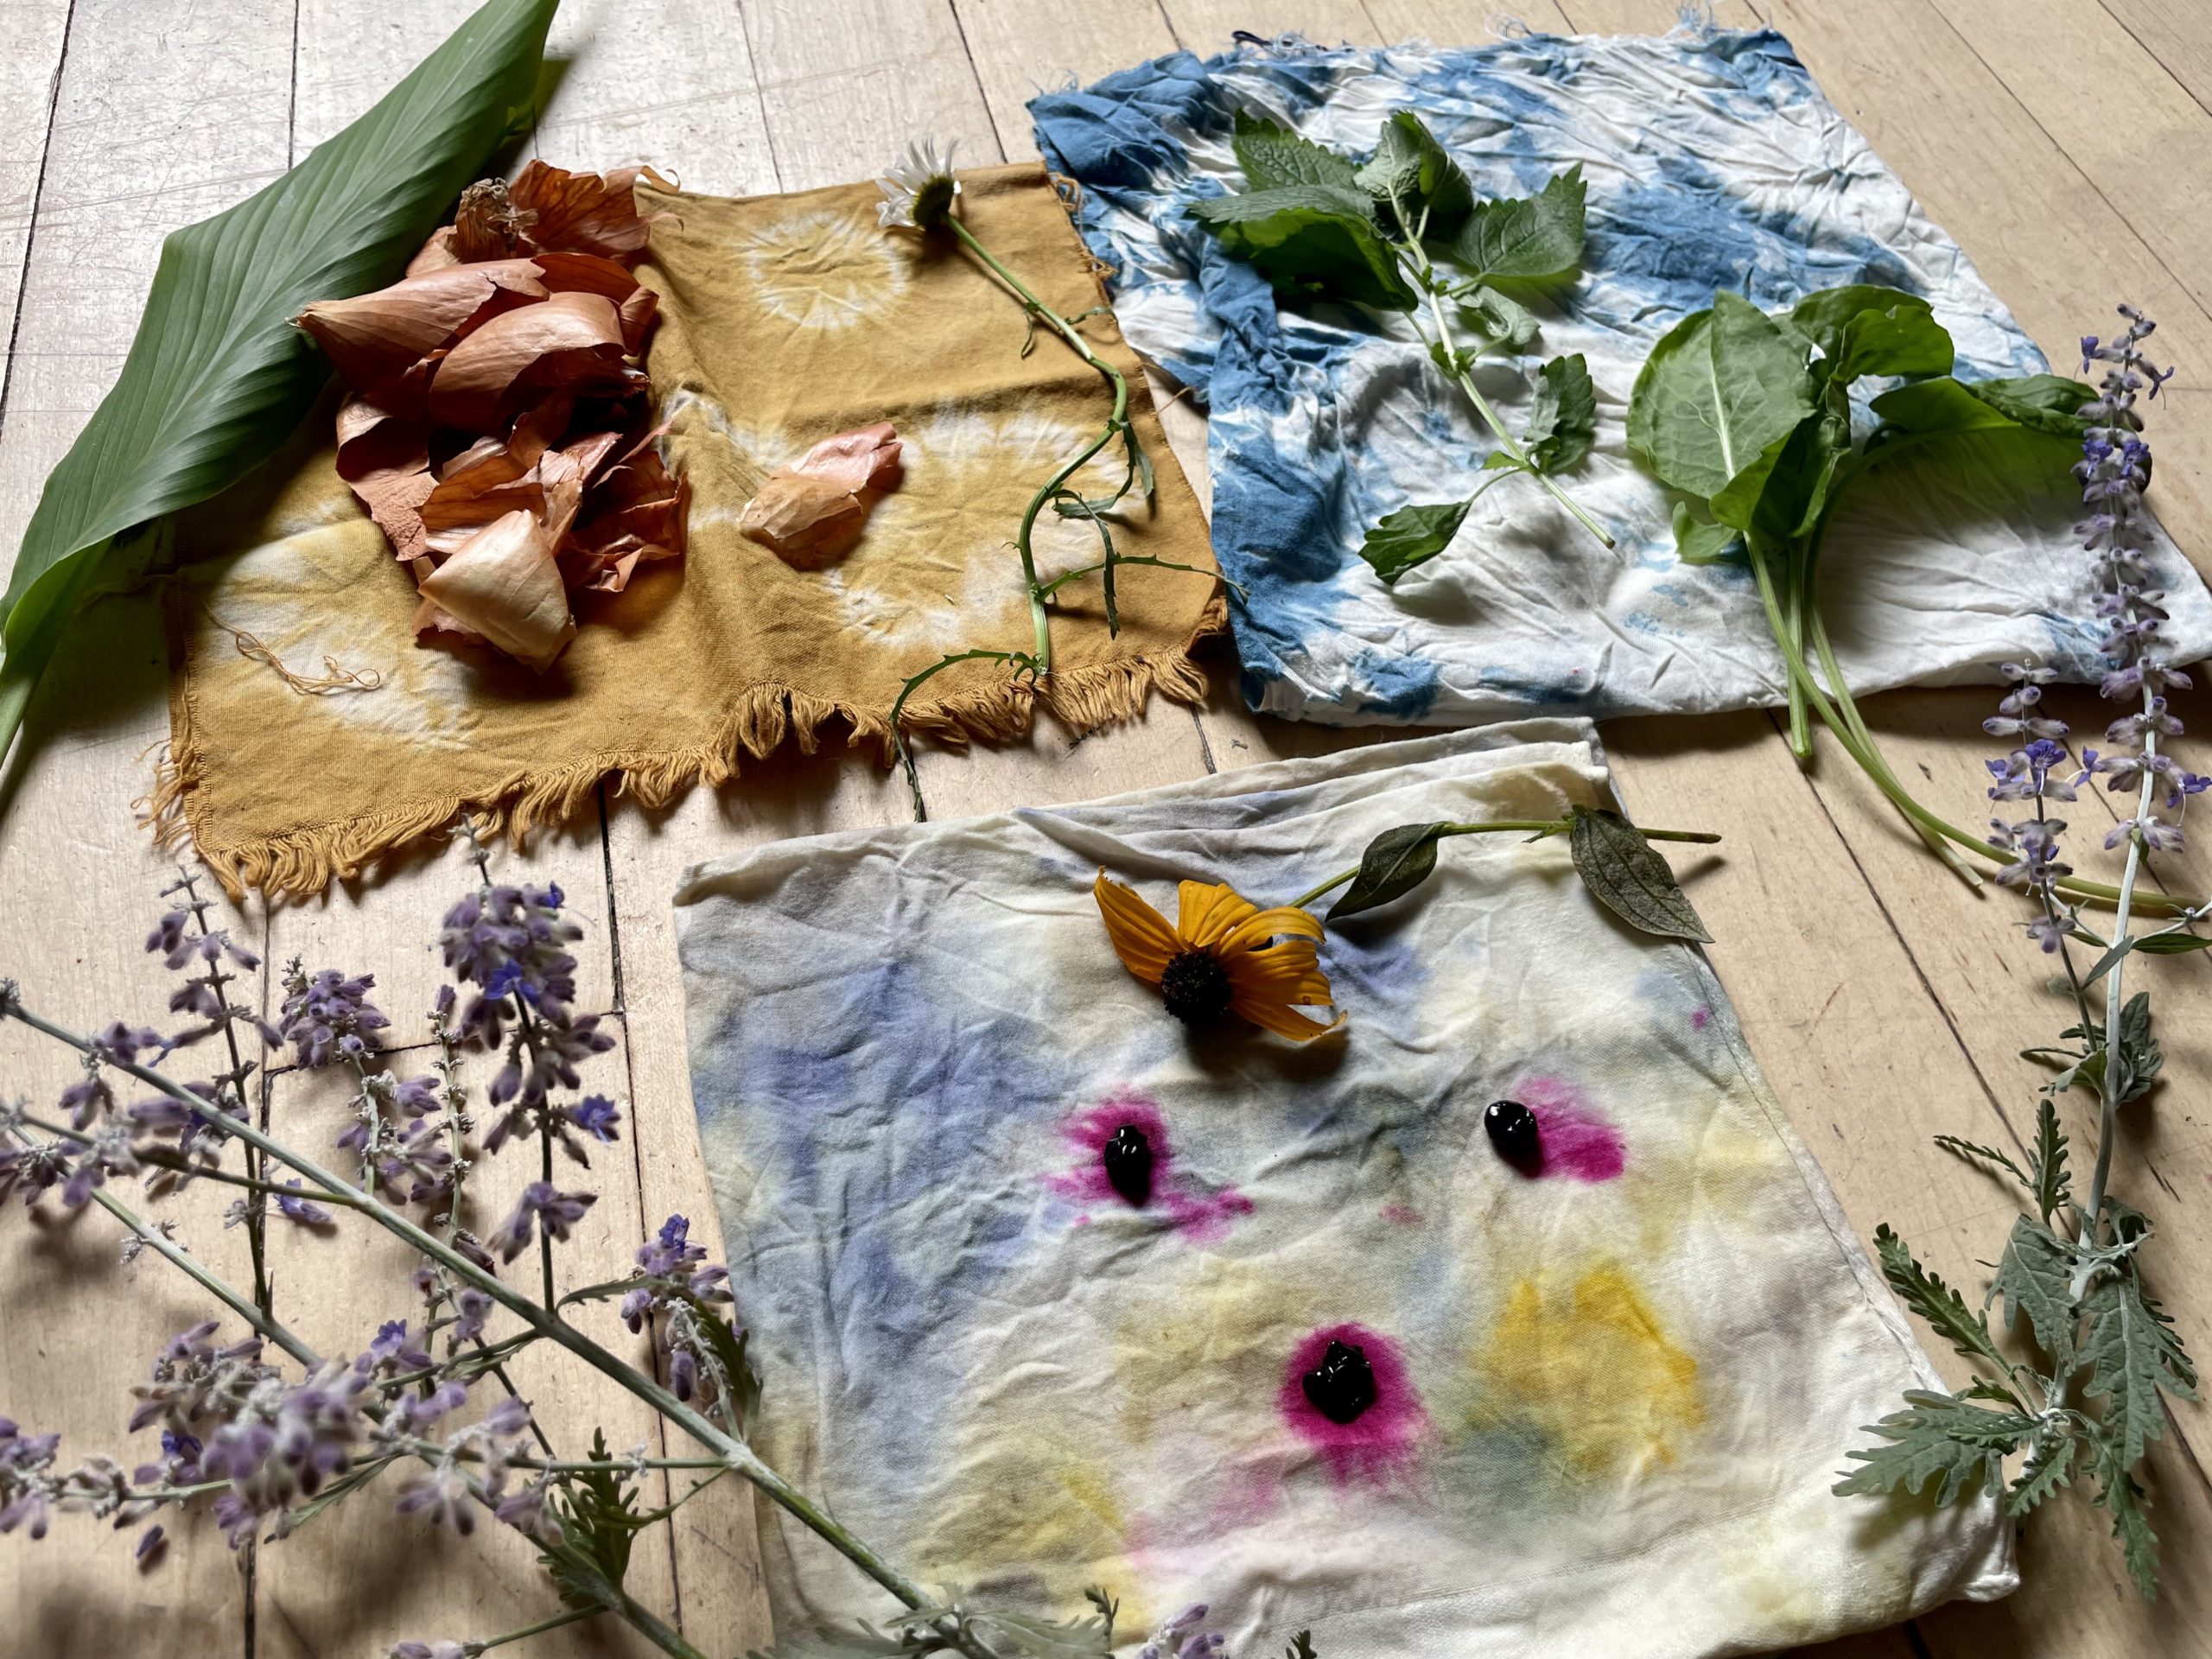 Three pieces of fabric dyed with plants, surrounded by bits of leaves, flowers, and onion skin